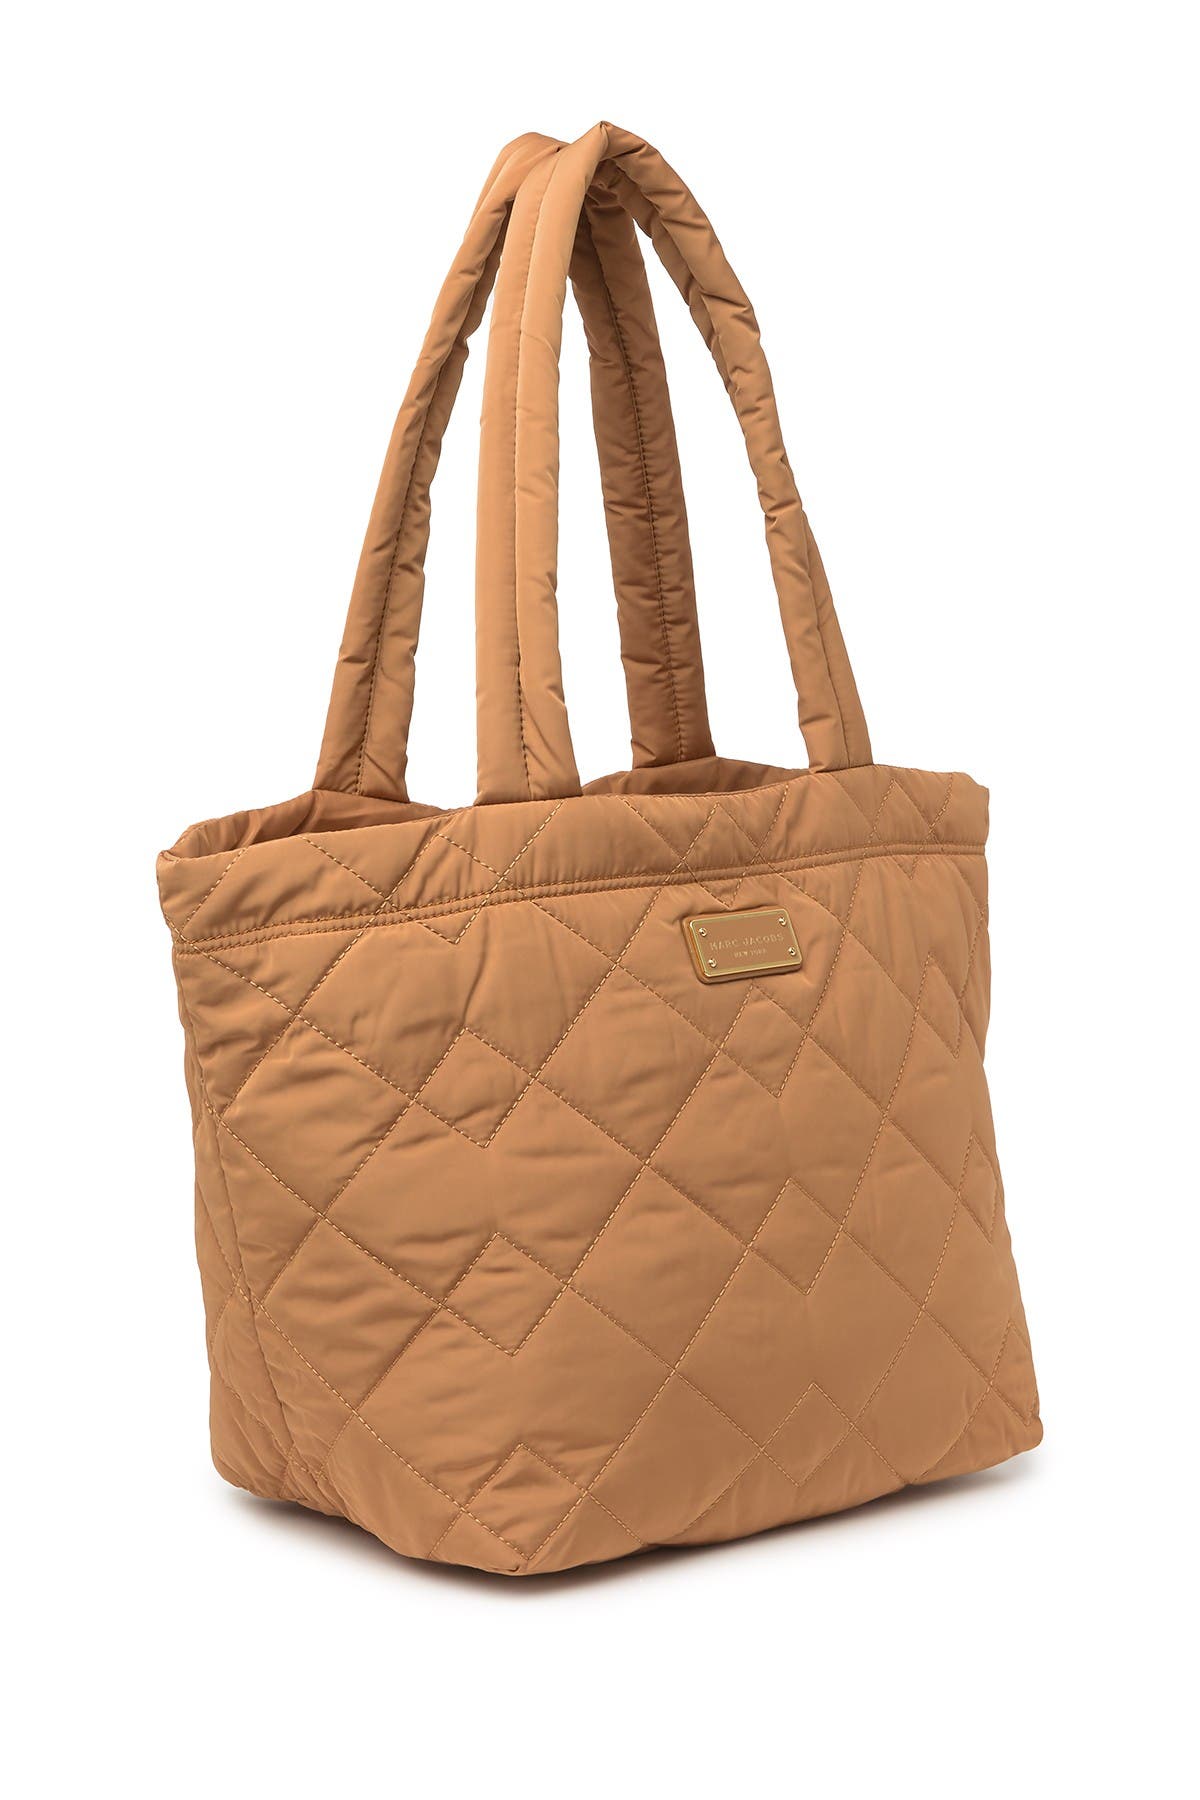 Marc Jacobs | Quilted Nylon Medium Tote Bag | Nordstrom Rack